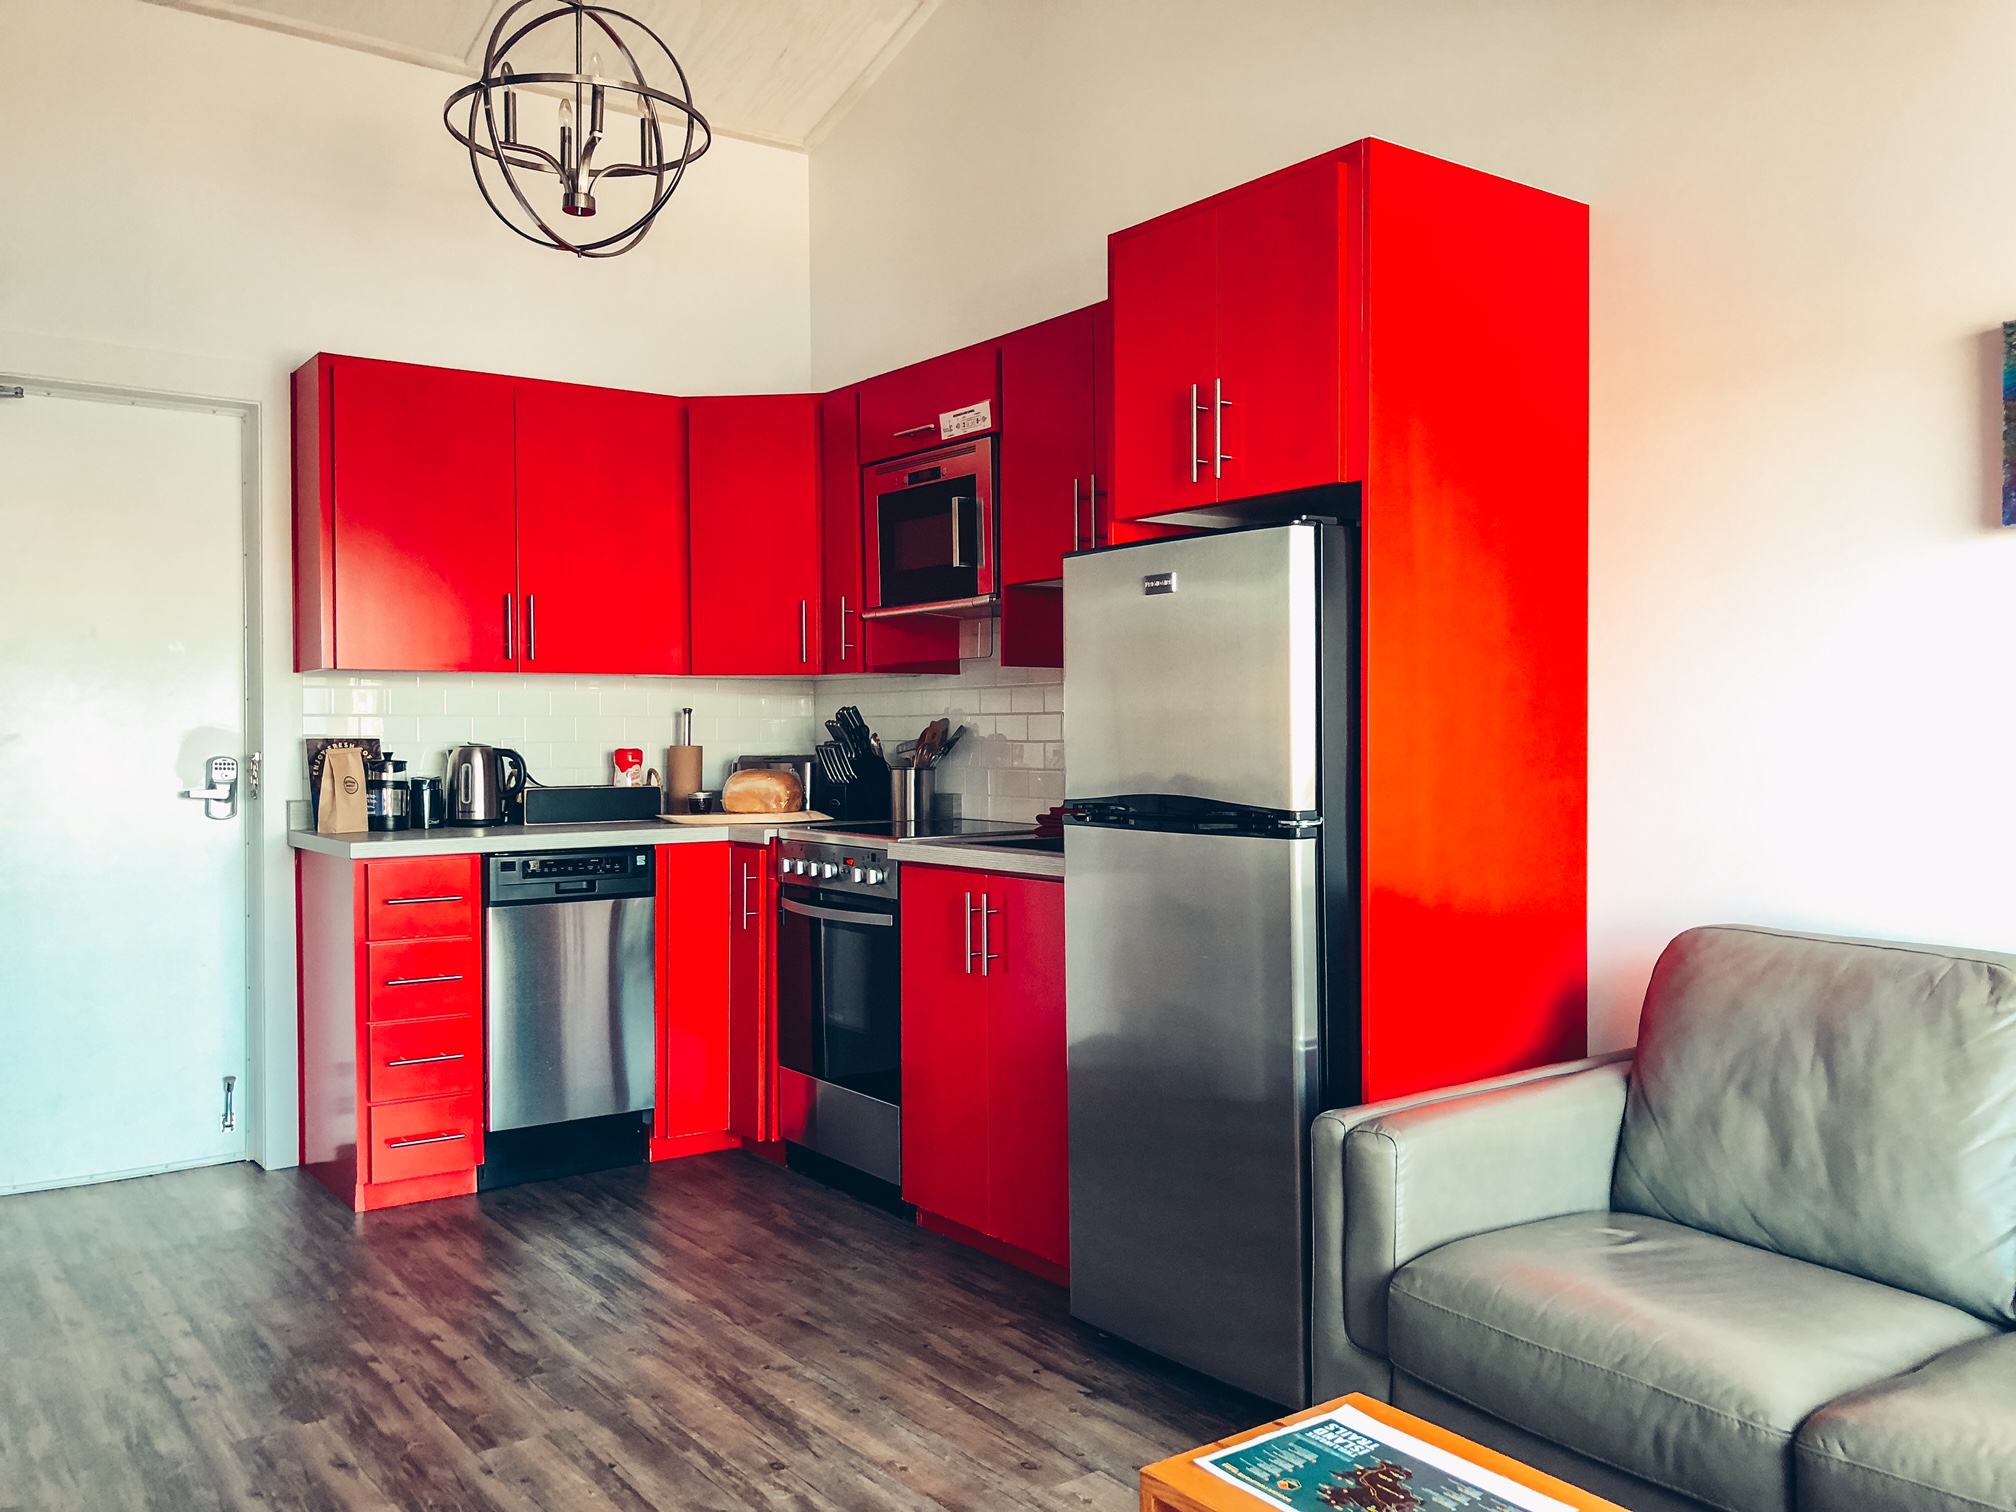 A photo of the self-catering kitchen in the suite, next to the living room area. The shelves are all bright red and the appliances are stainless steel.